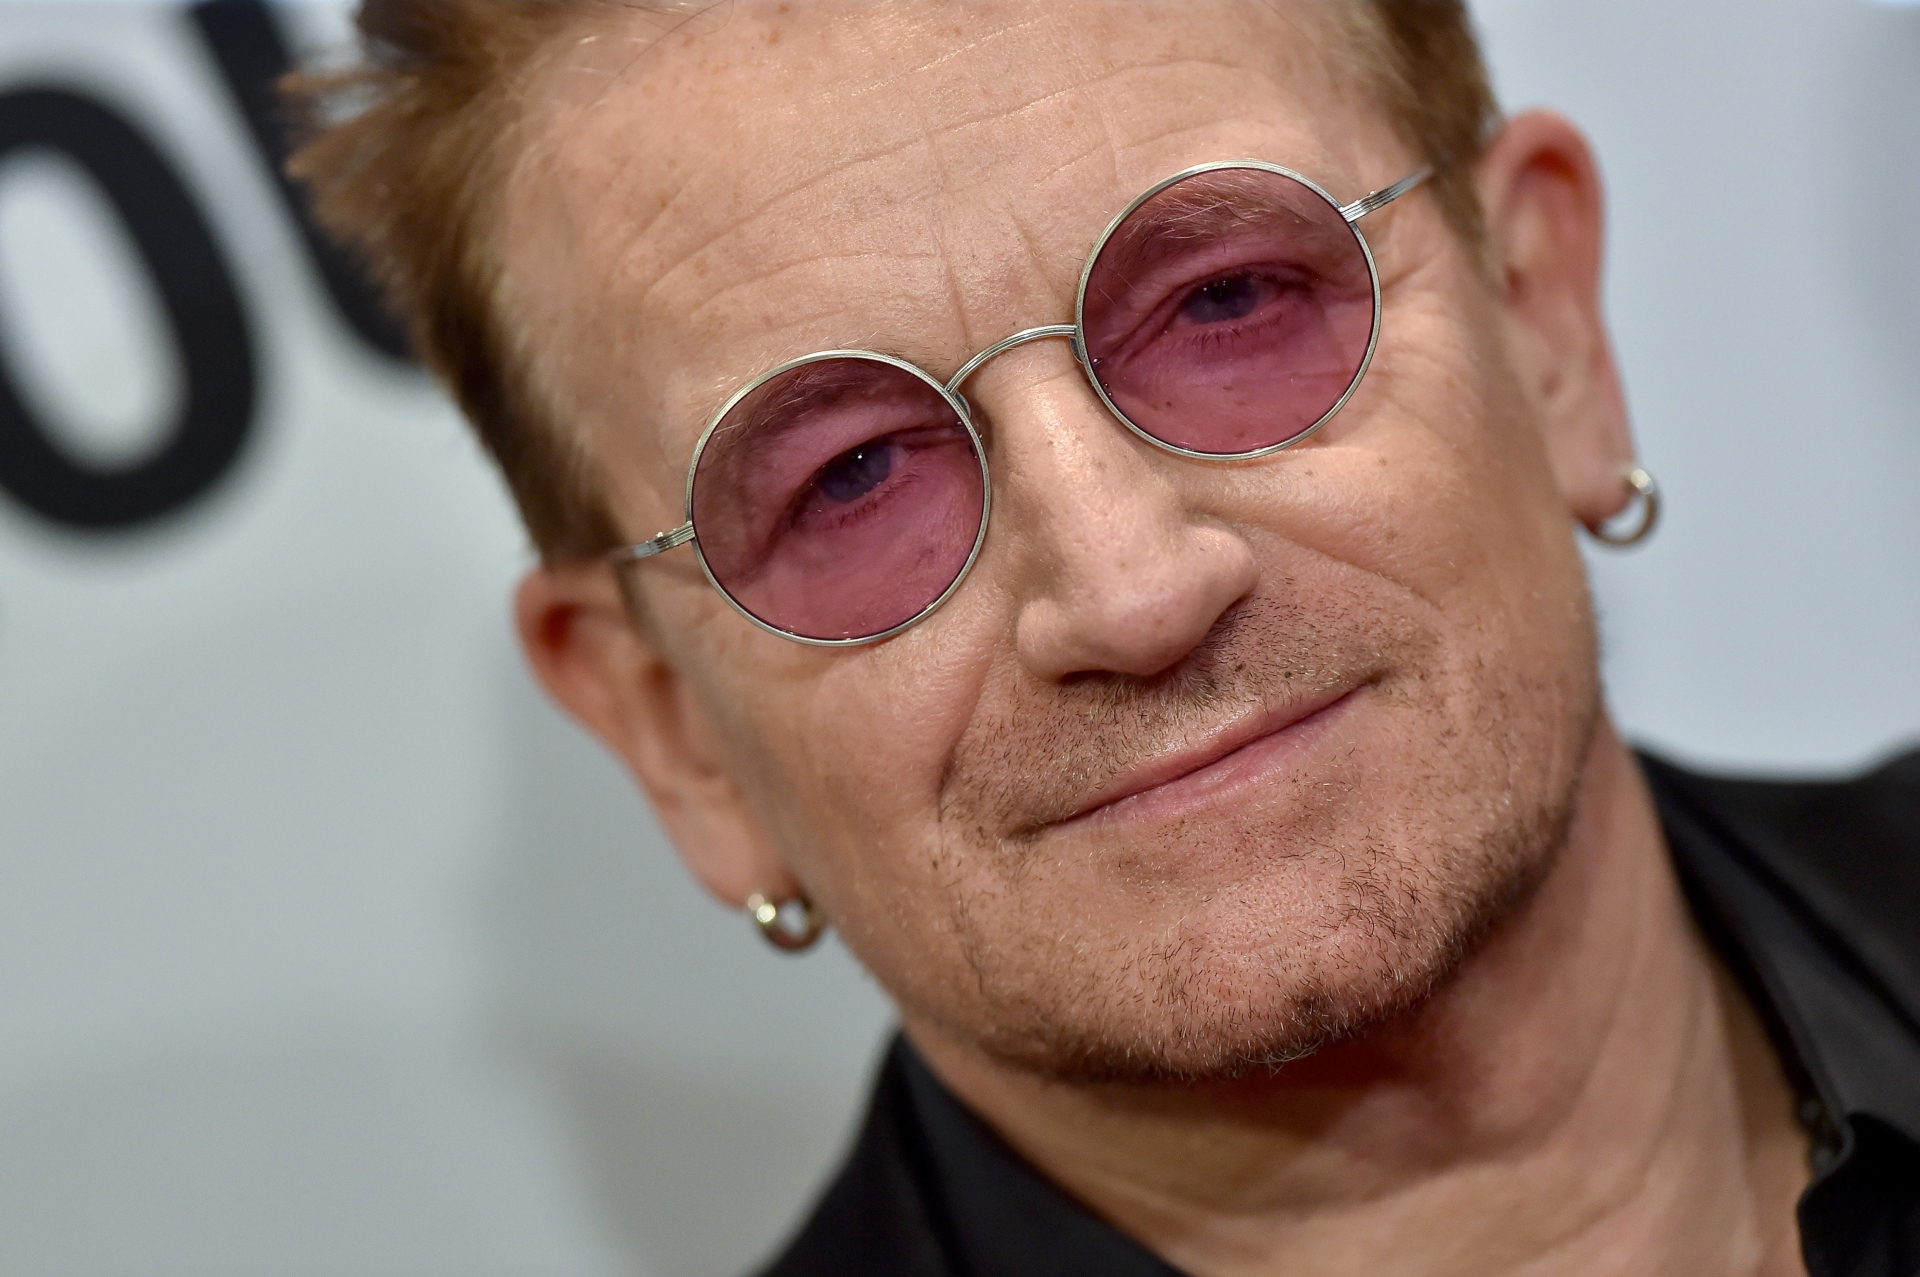 Bono at age 64: his most iconic moments with U2